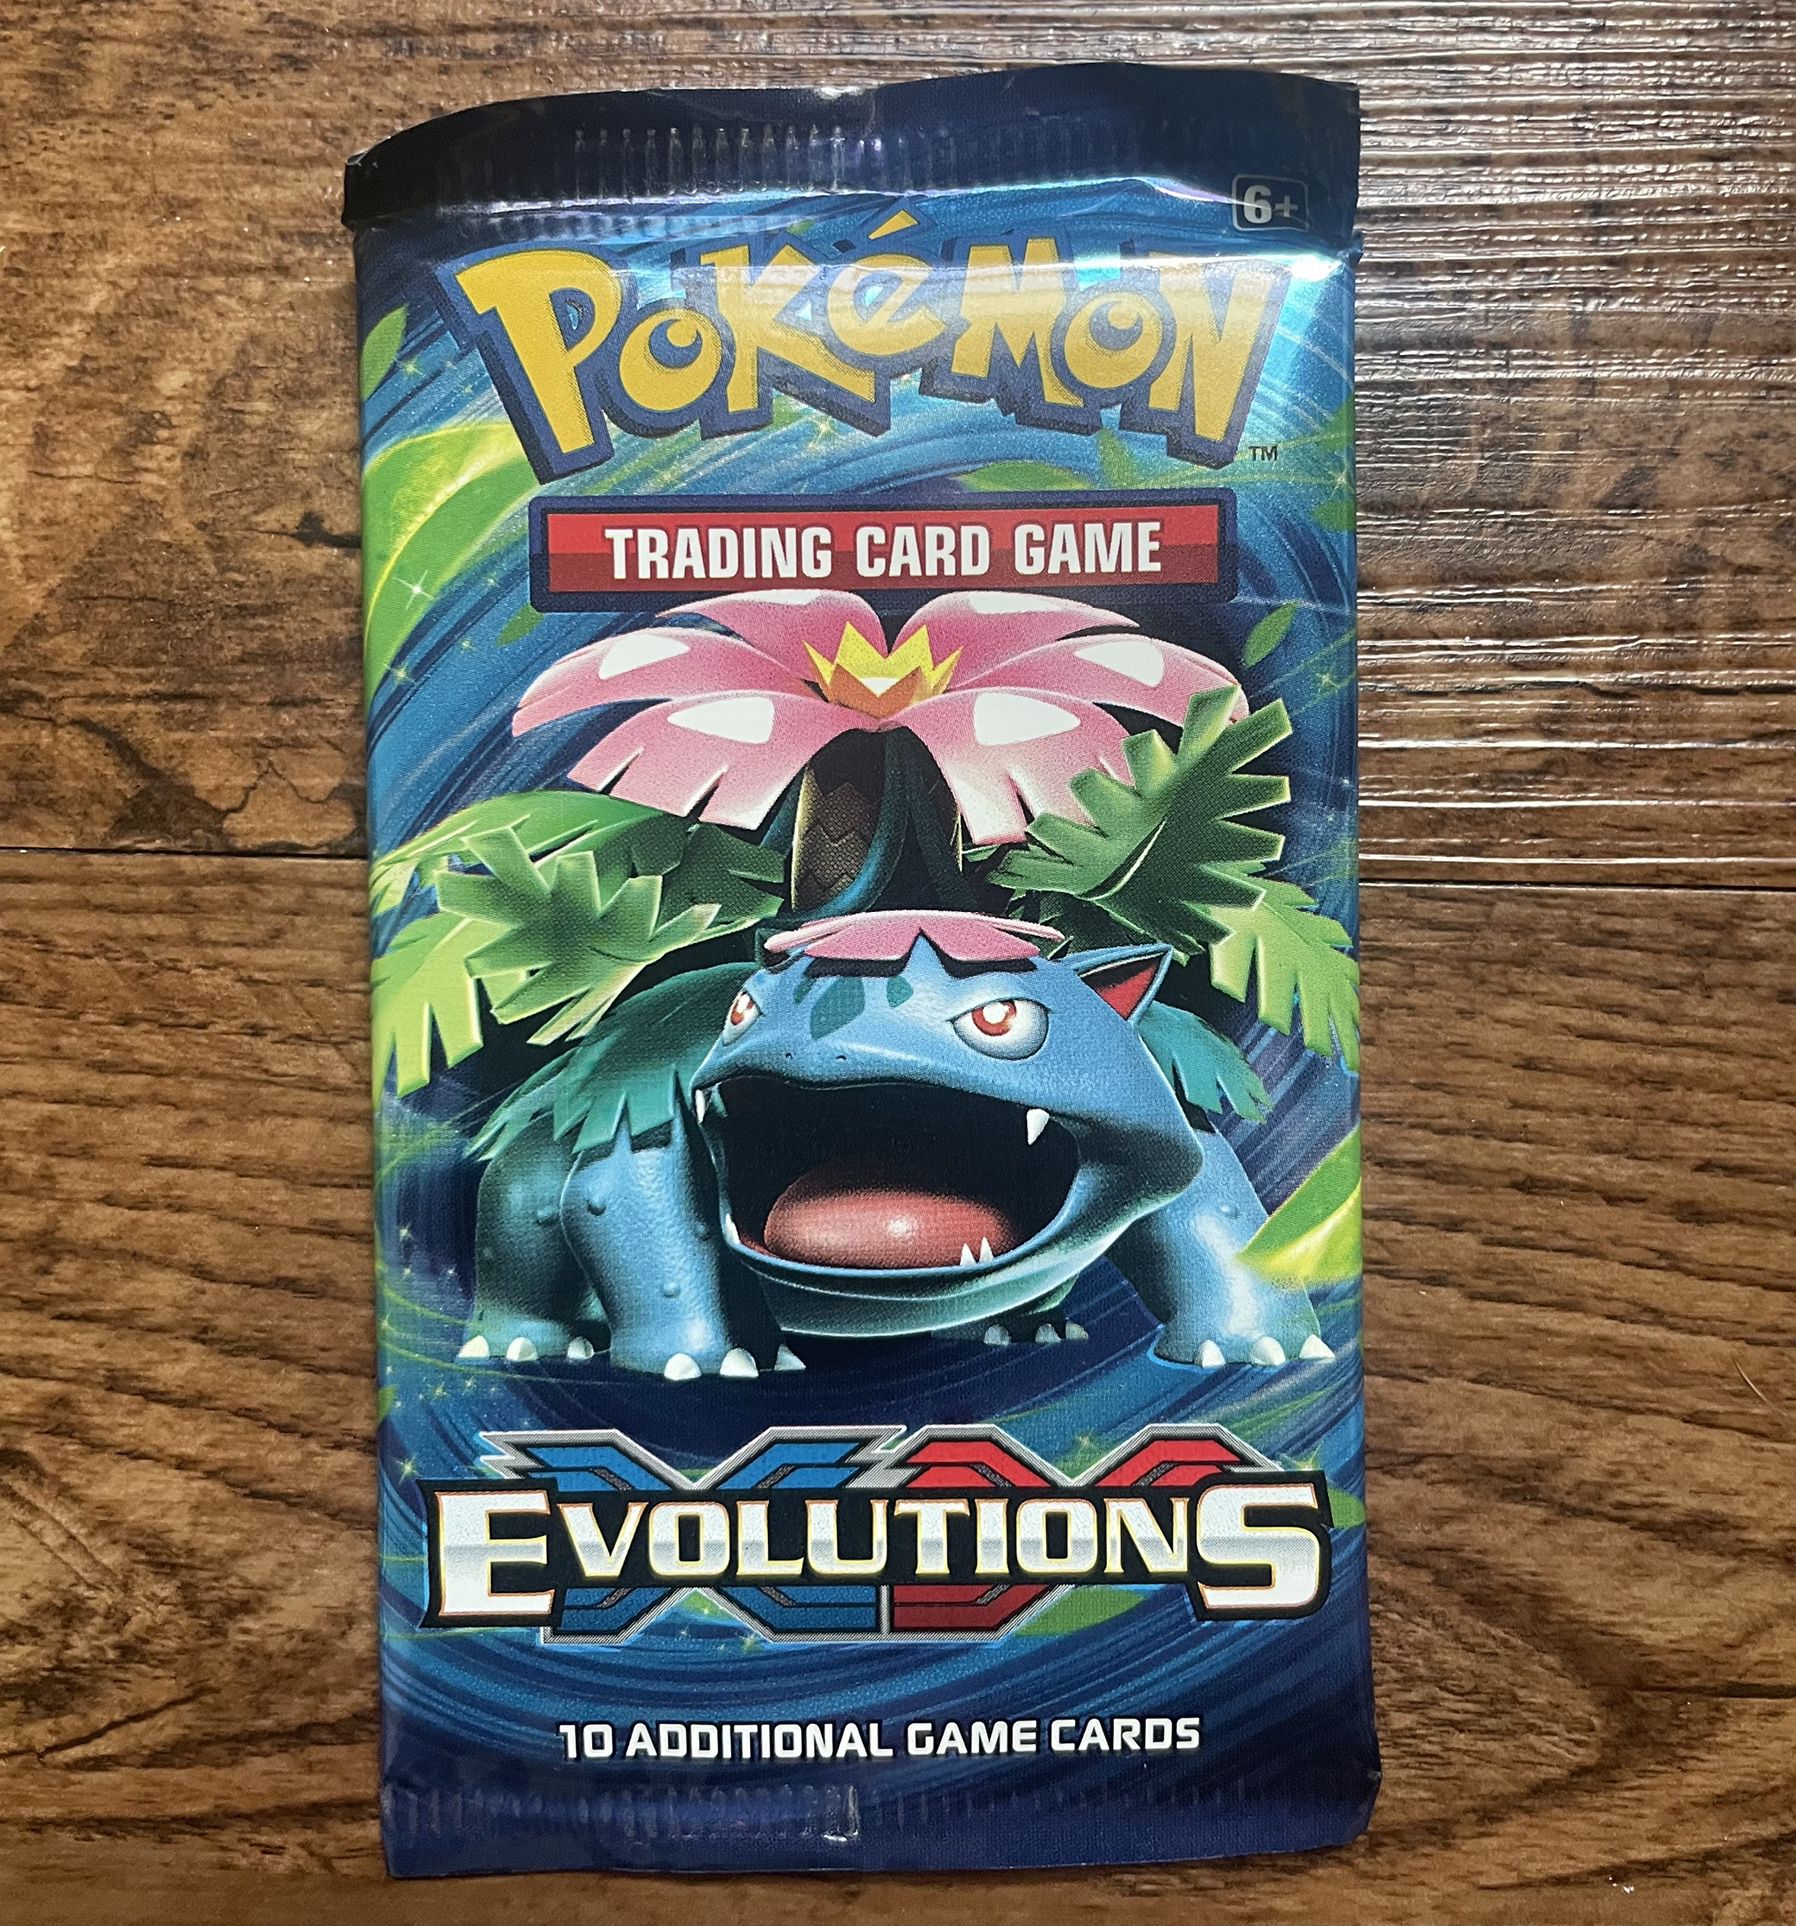 Sealed 2016 Pokemon TCG XY Evolutions 10 card Booster Pack.  I took this out of a collection box.  Rare XY Evolutions Charizard reverse Holo card?!